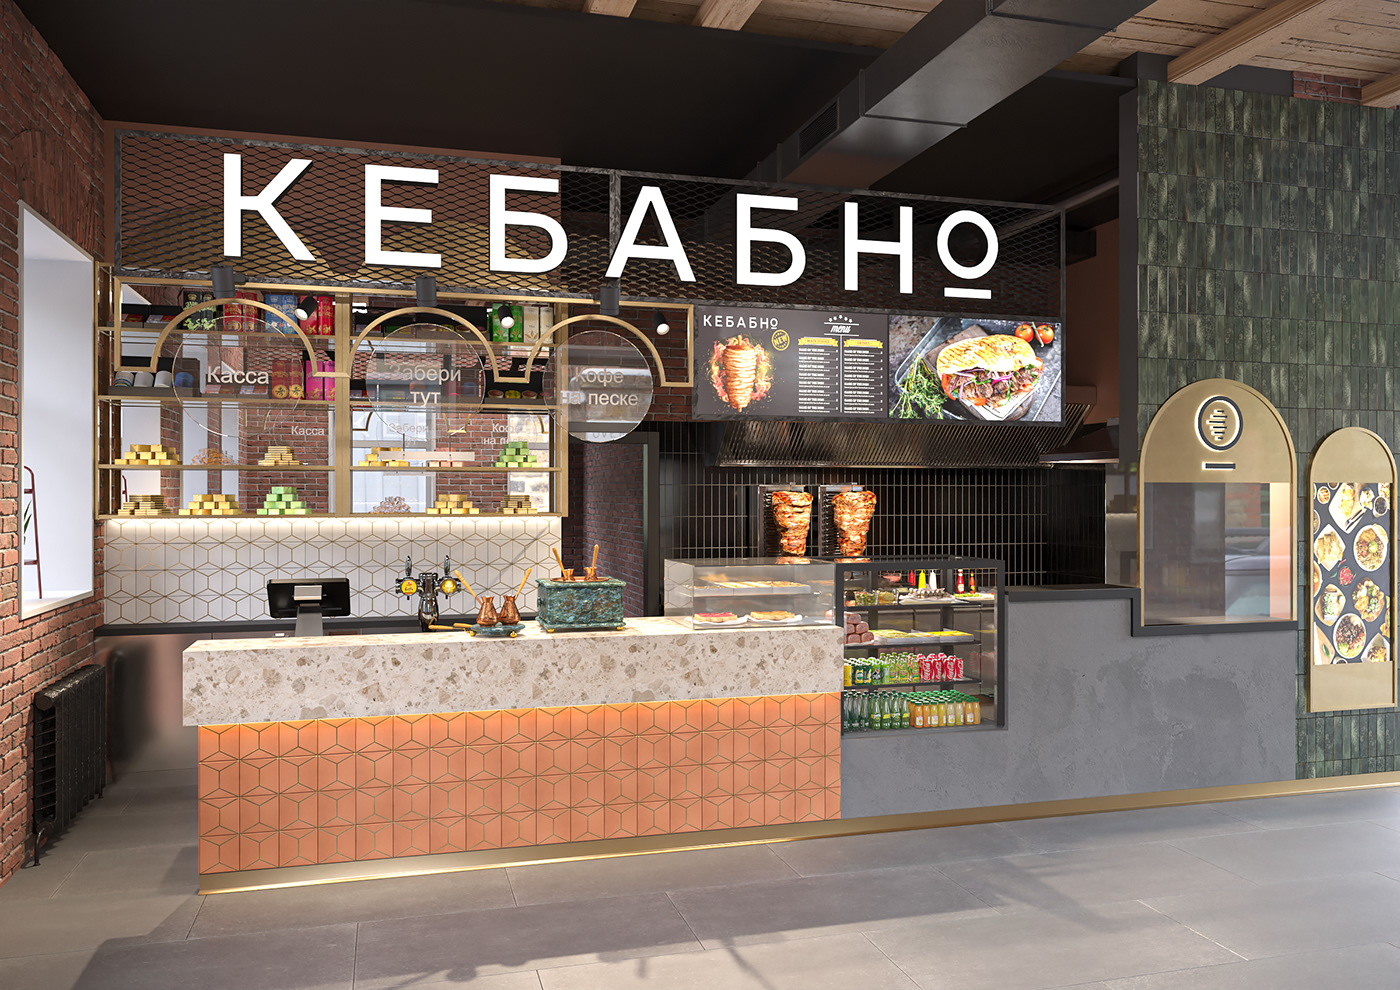 zoom design Project projectmanagement Moscow restaurant architecture Turkey foodhall kebab